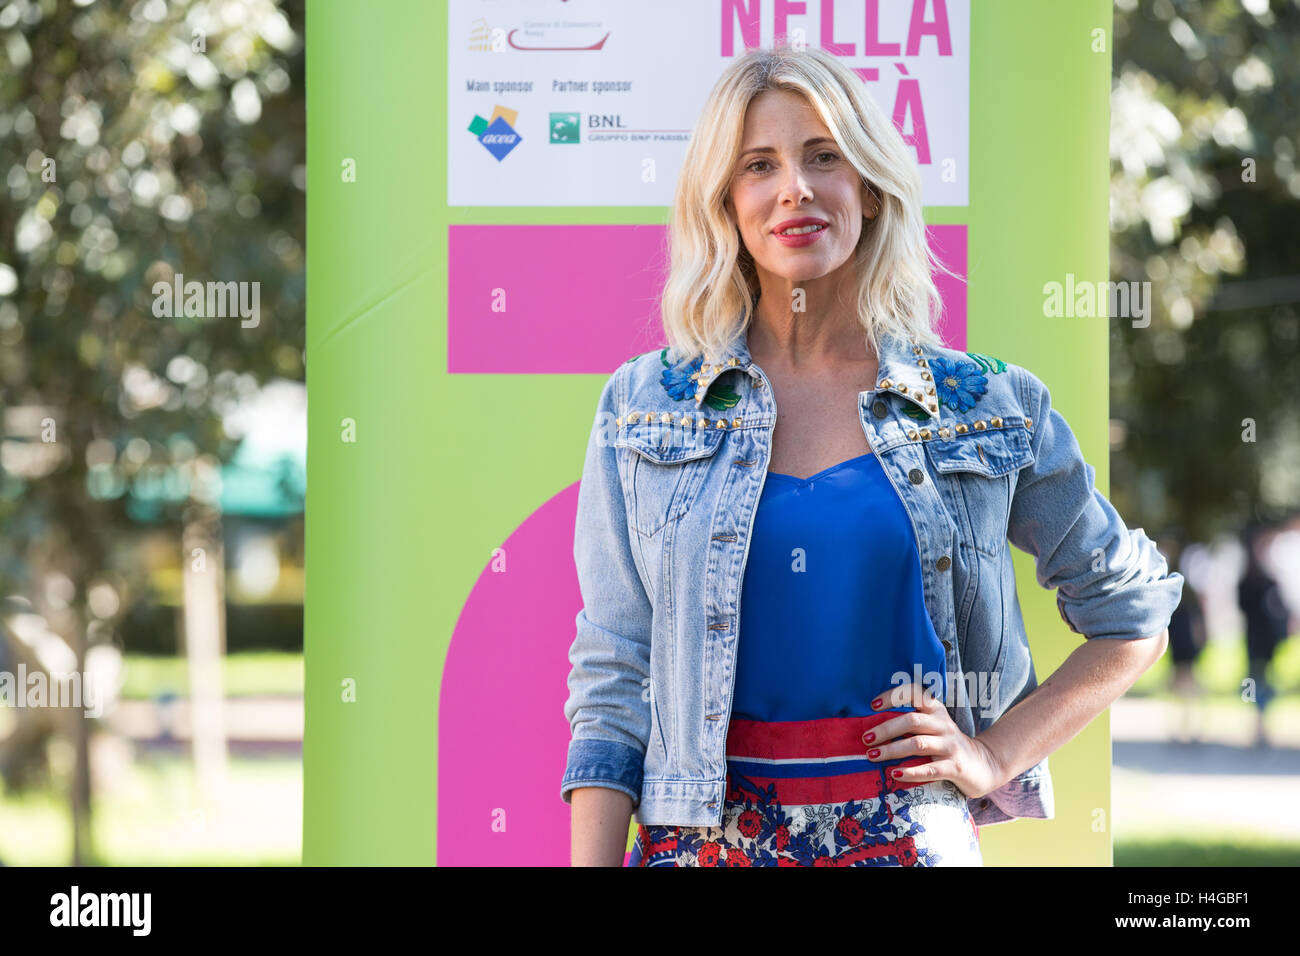 Rome, Italy. 16th October 2016. Alessia Marcuzzi at photocall and Red Carpet for the film 'Cicogne in missione' at Rome Film Festival 2016 Credit: Luigi de Pompeis/Alamy Live News Stock Photo